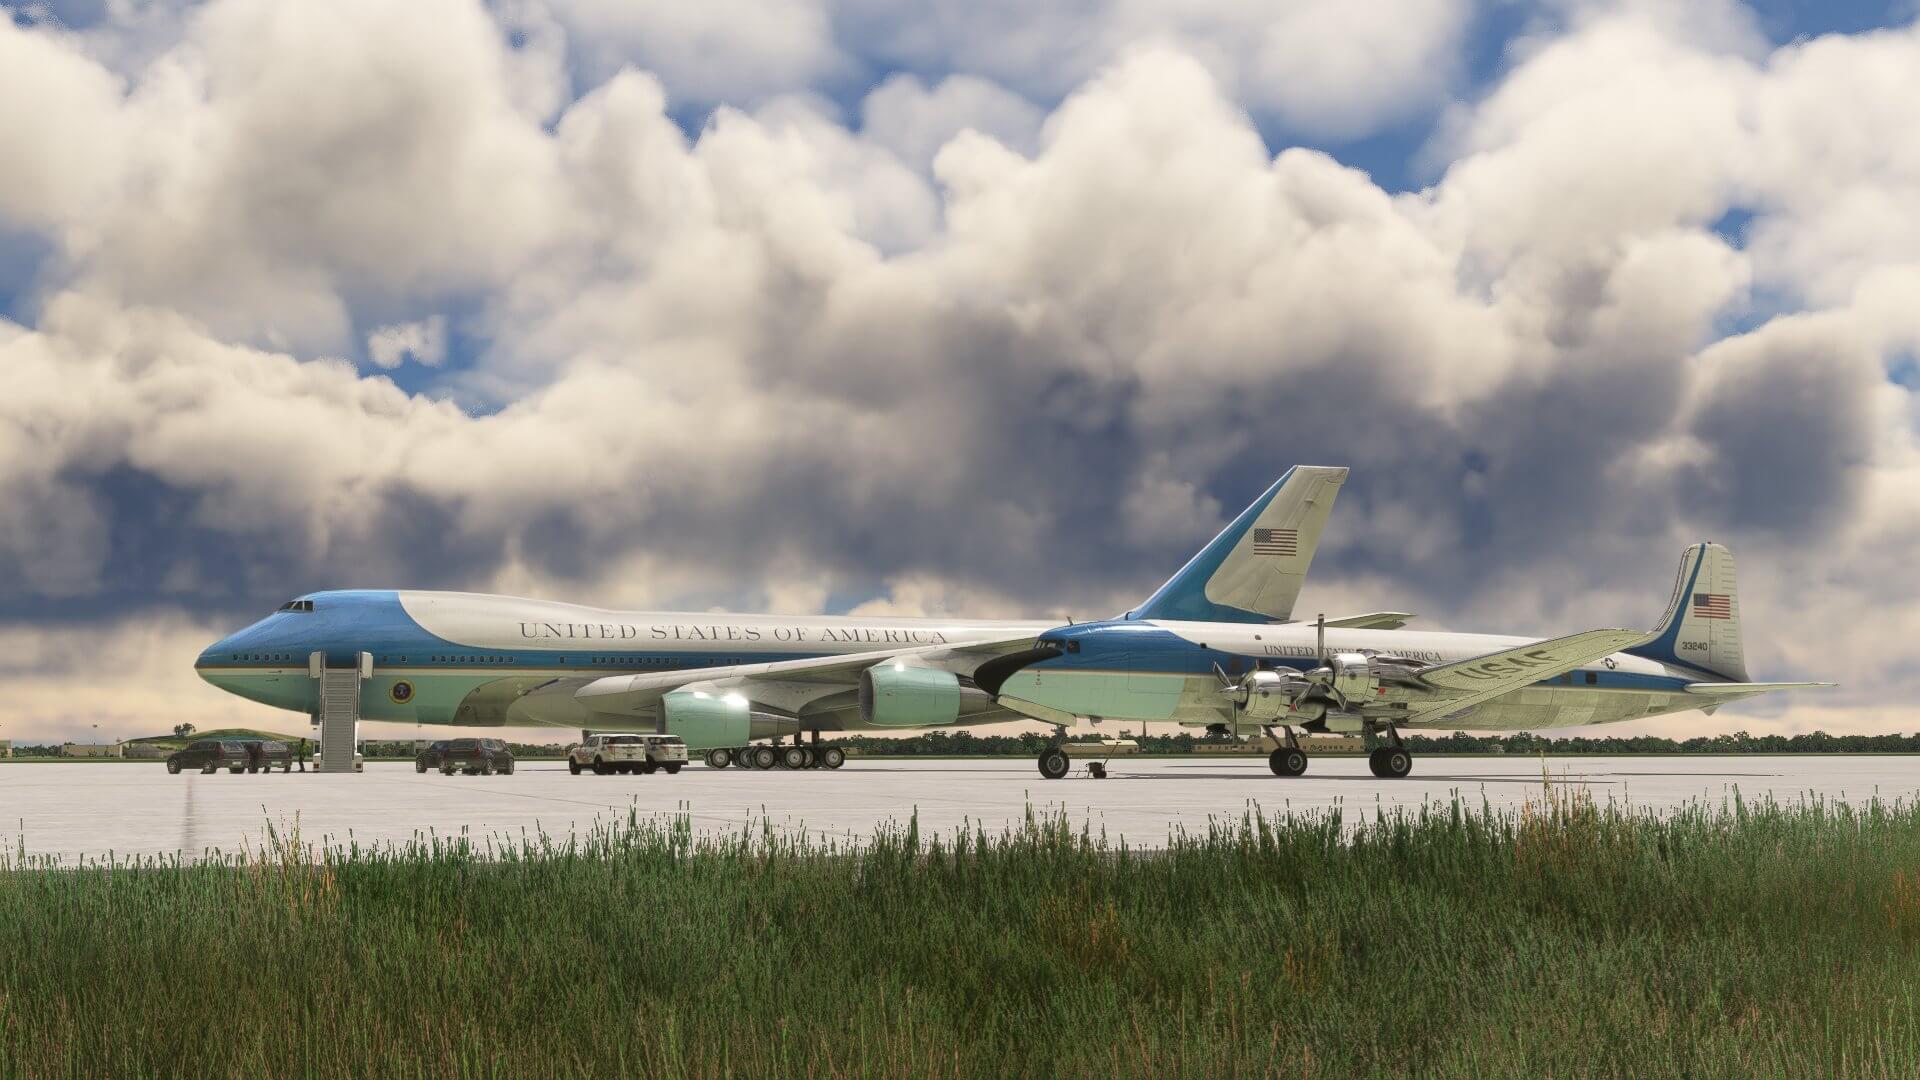 The VC-25 and DC-6 Air Force One aircraft lined up on an apron next to each other